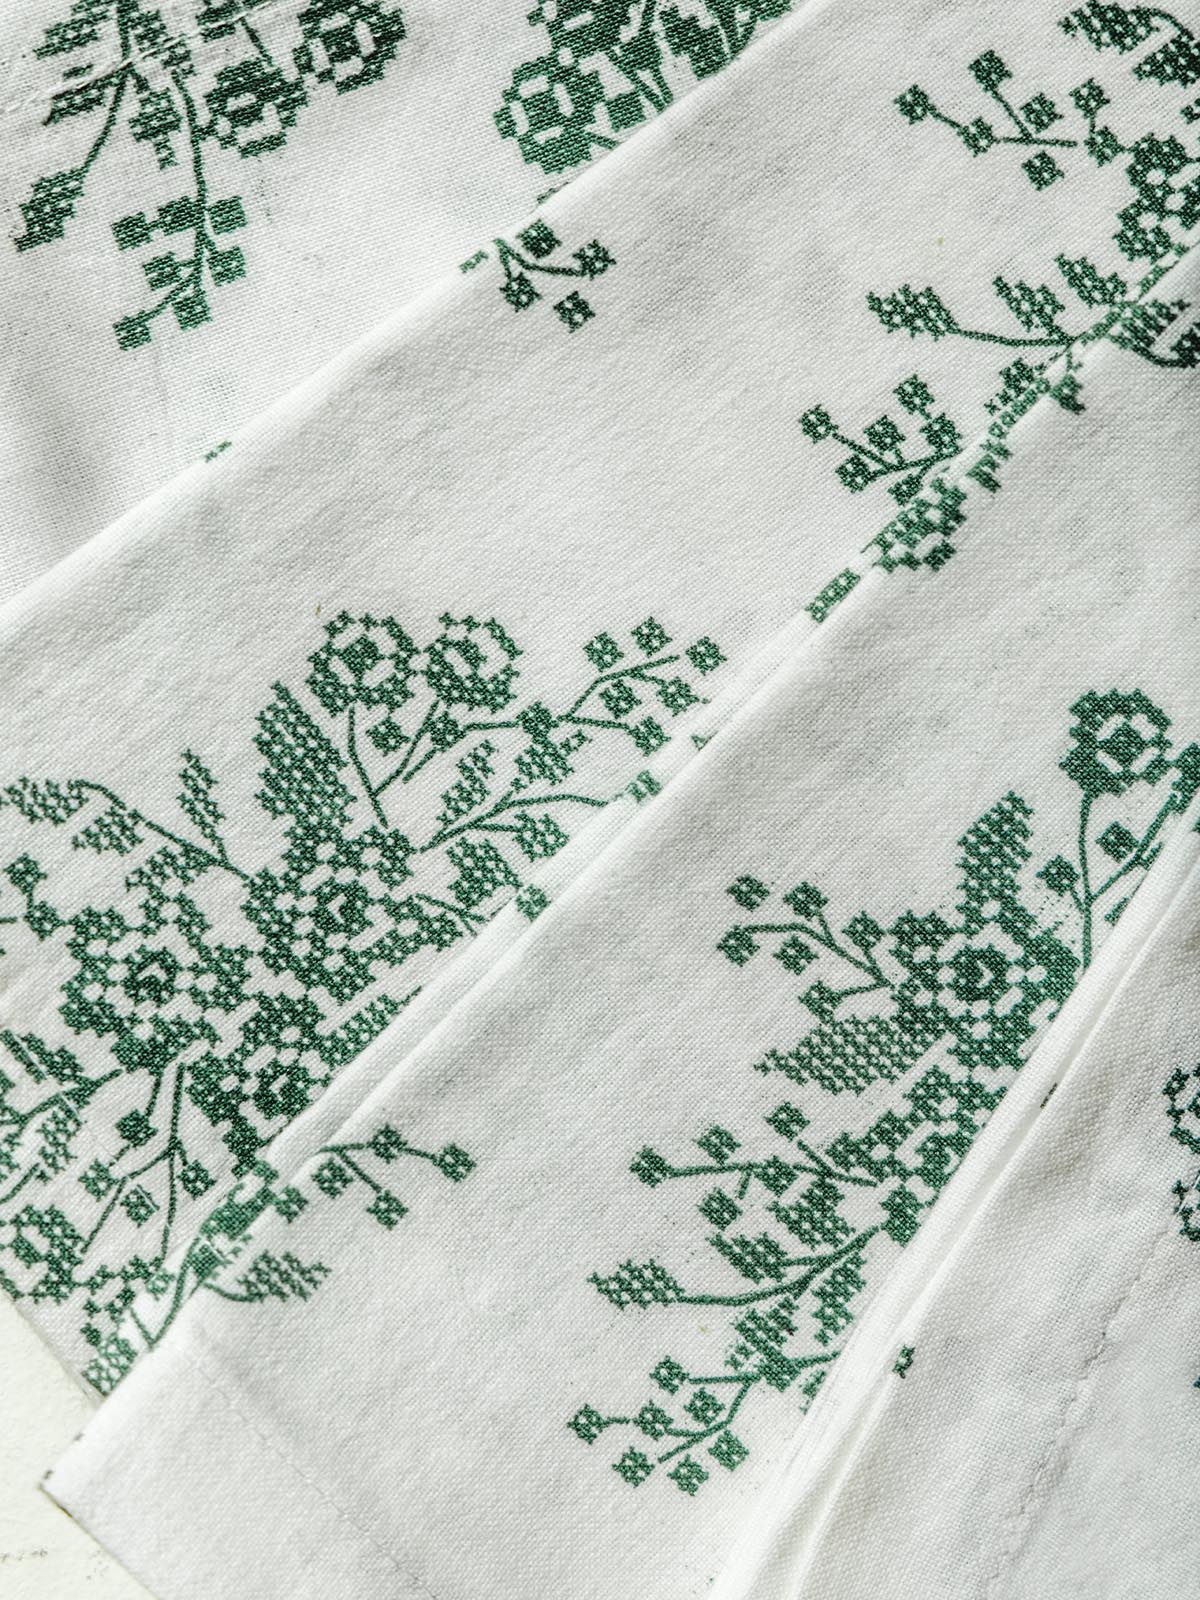 Close up details of white napkin with jade floral embroidery.